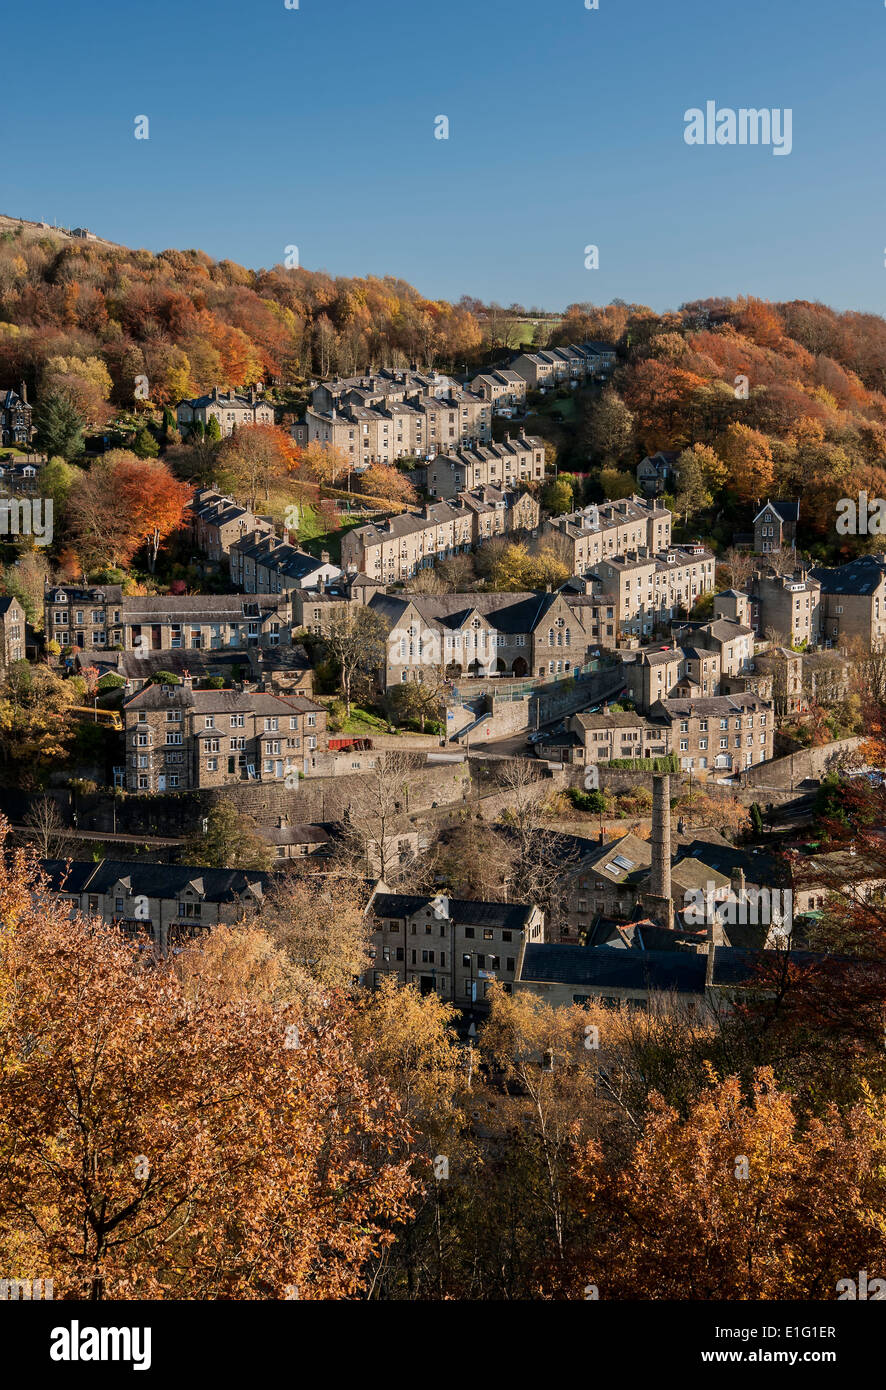 The Northern England market town of Hebden Bridge in West Yorkshire Stock Photo